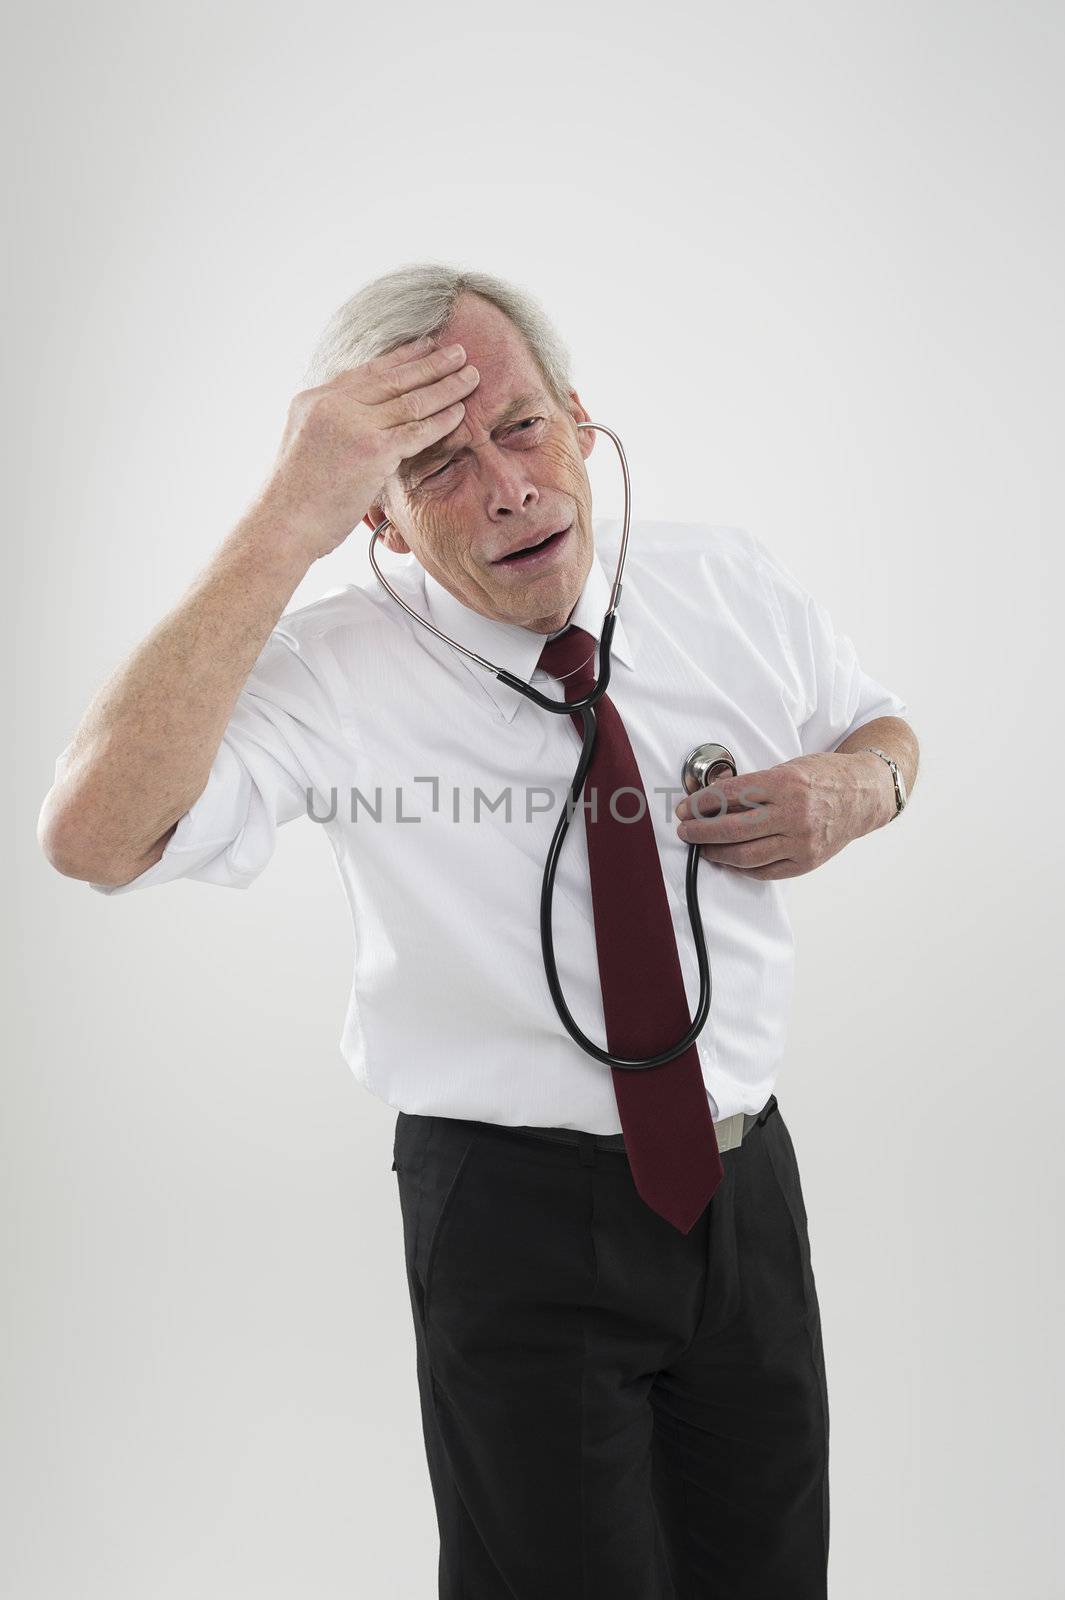 Old man, who is feeling unwell, is trying to diagnose his condition his own illness with the help of a stethoscope